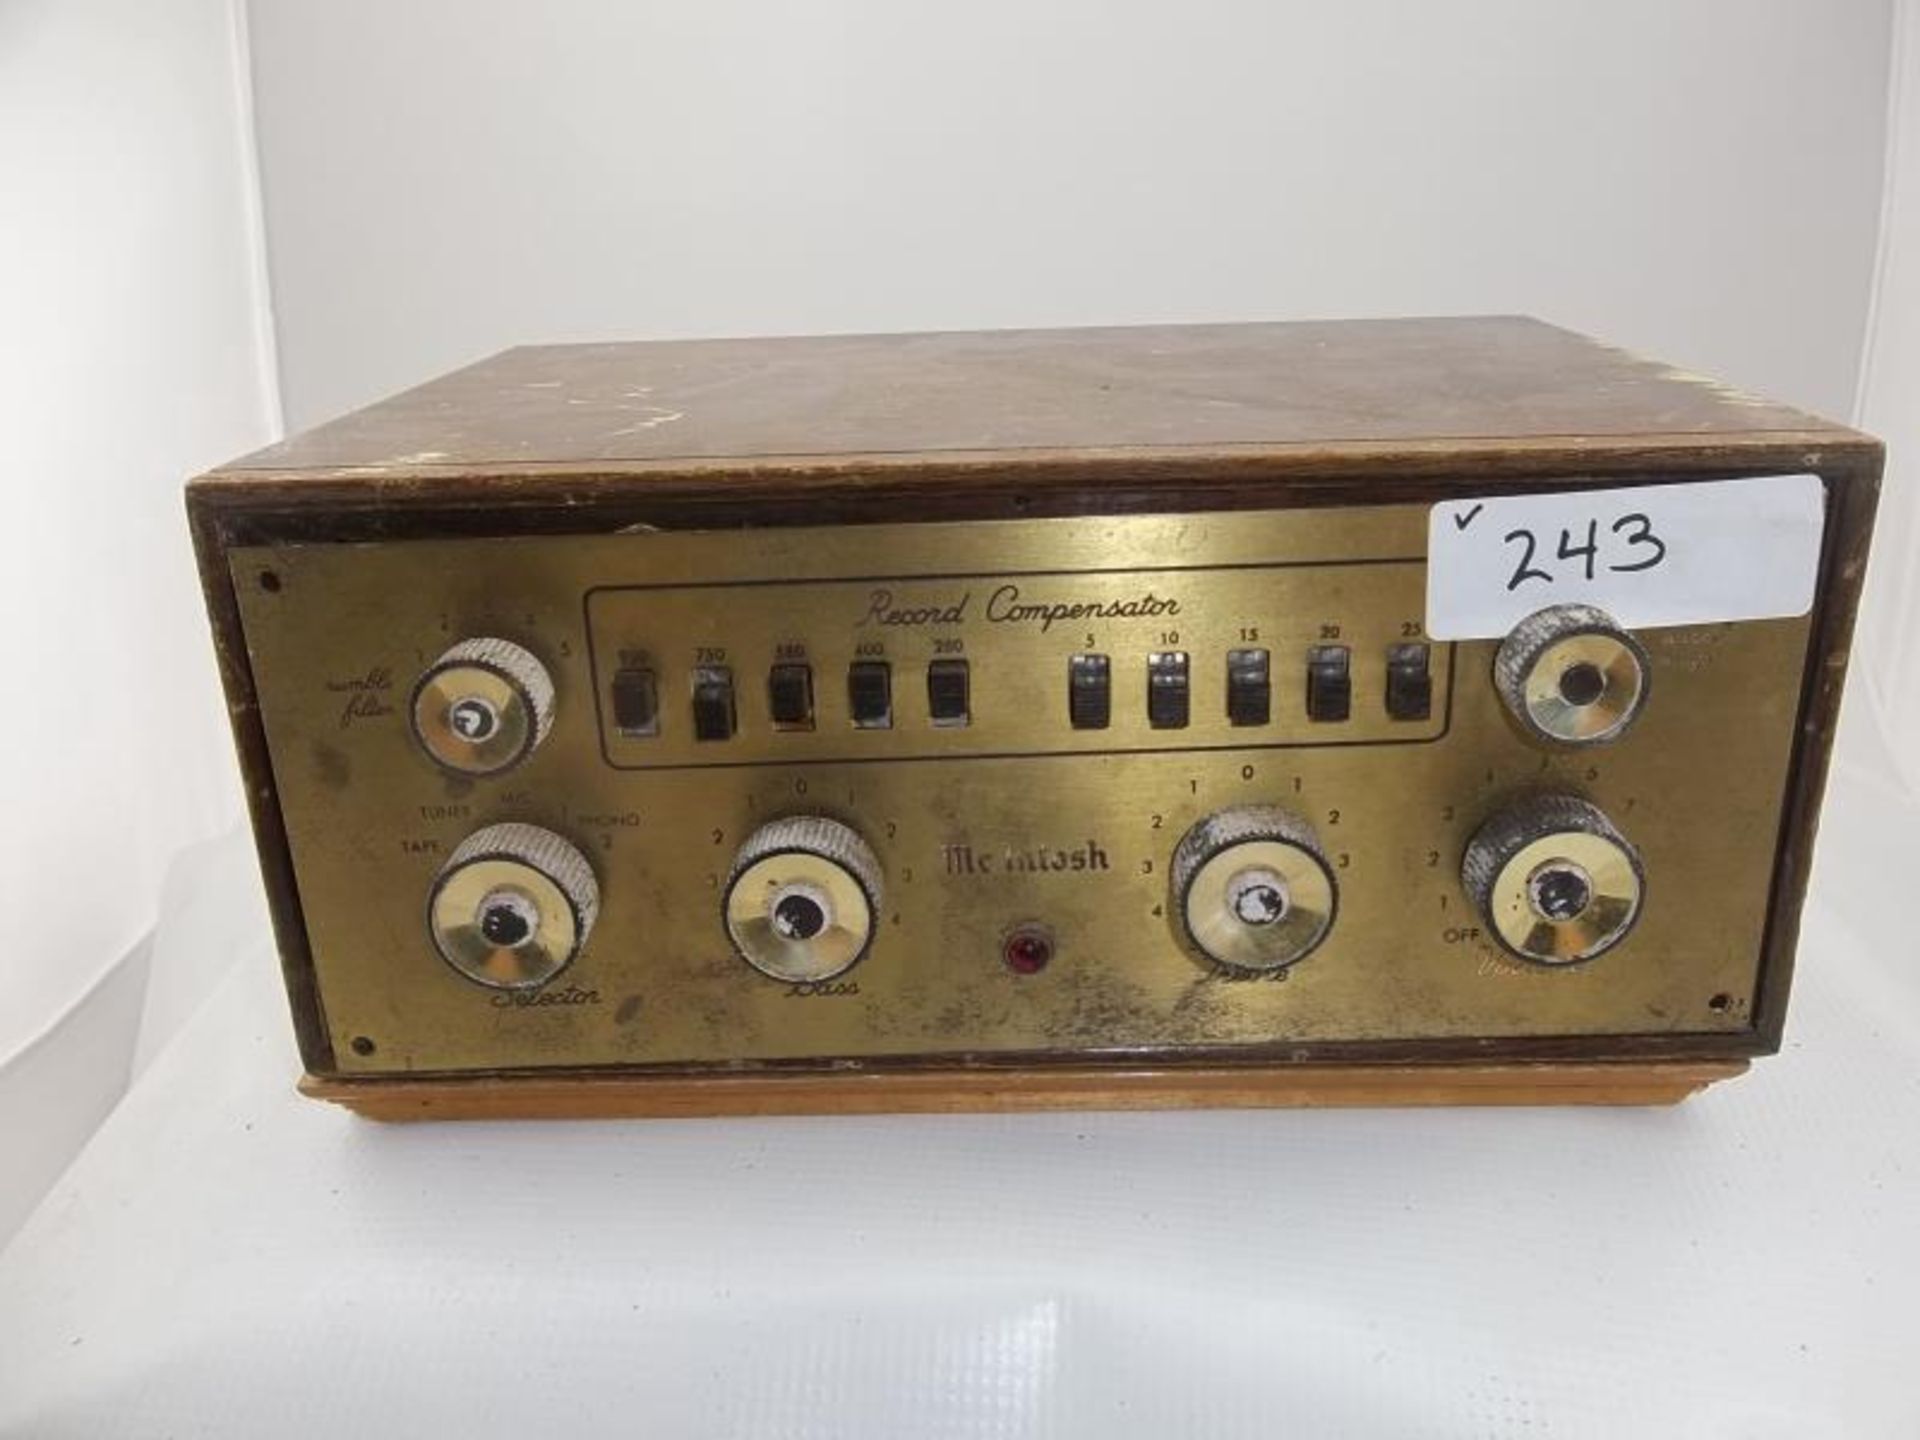 McIntosh Record Compensator, C-8, w/ case, scratched, s# illegible, tested - powers up